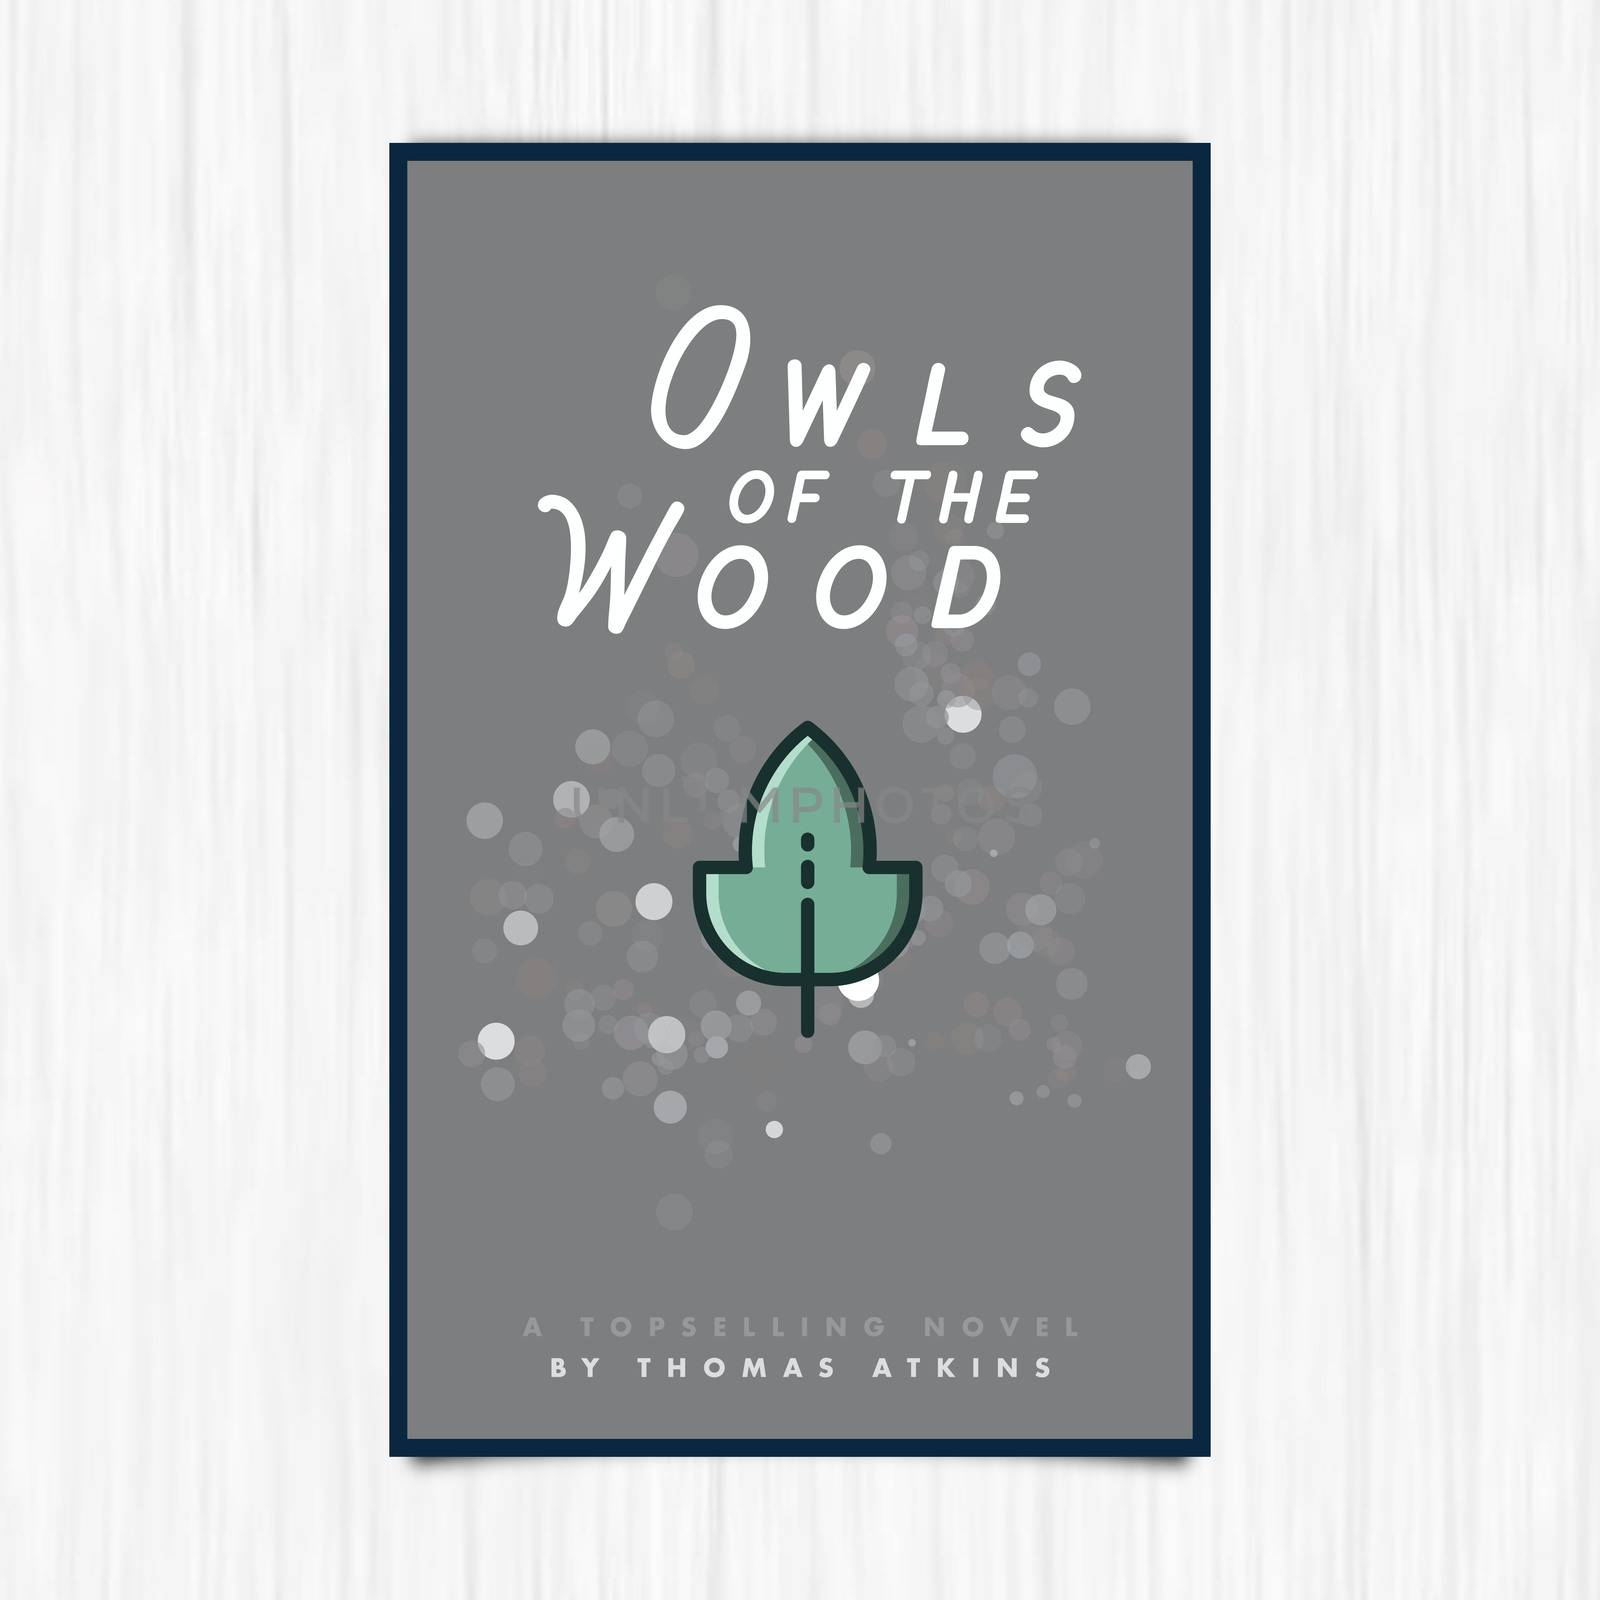 Vector of novel cover with owls of the wood text against white background